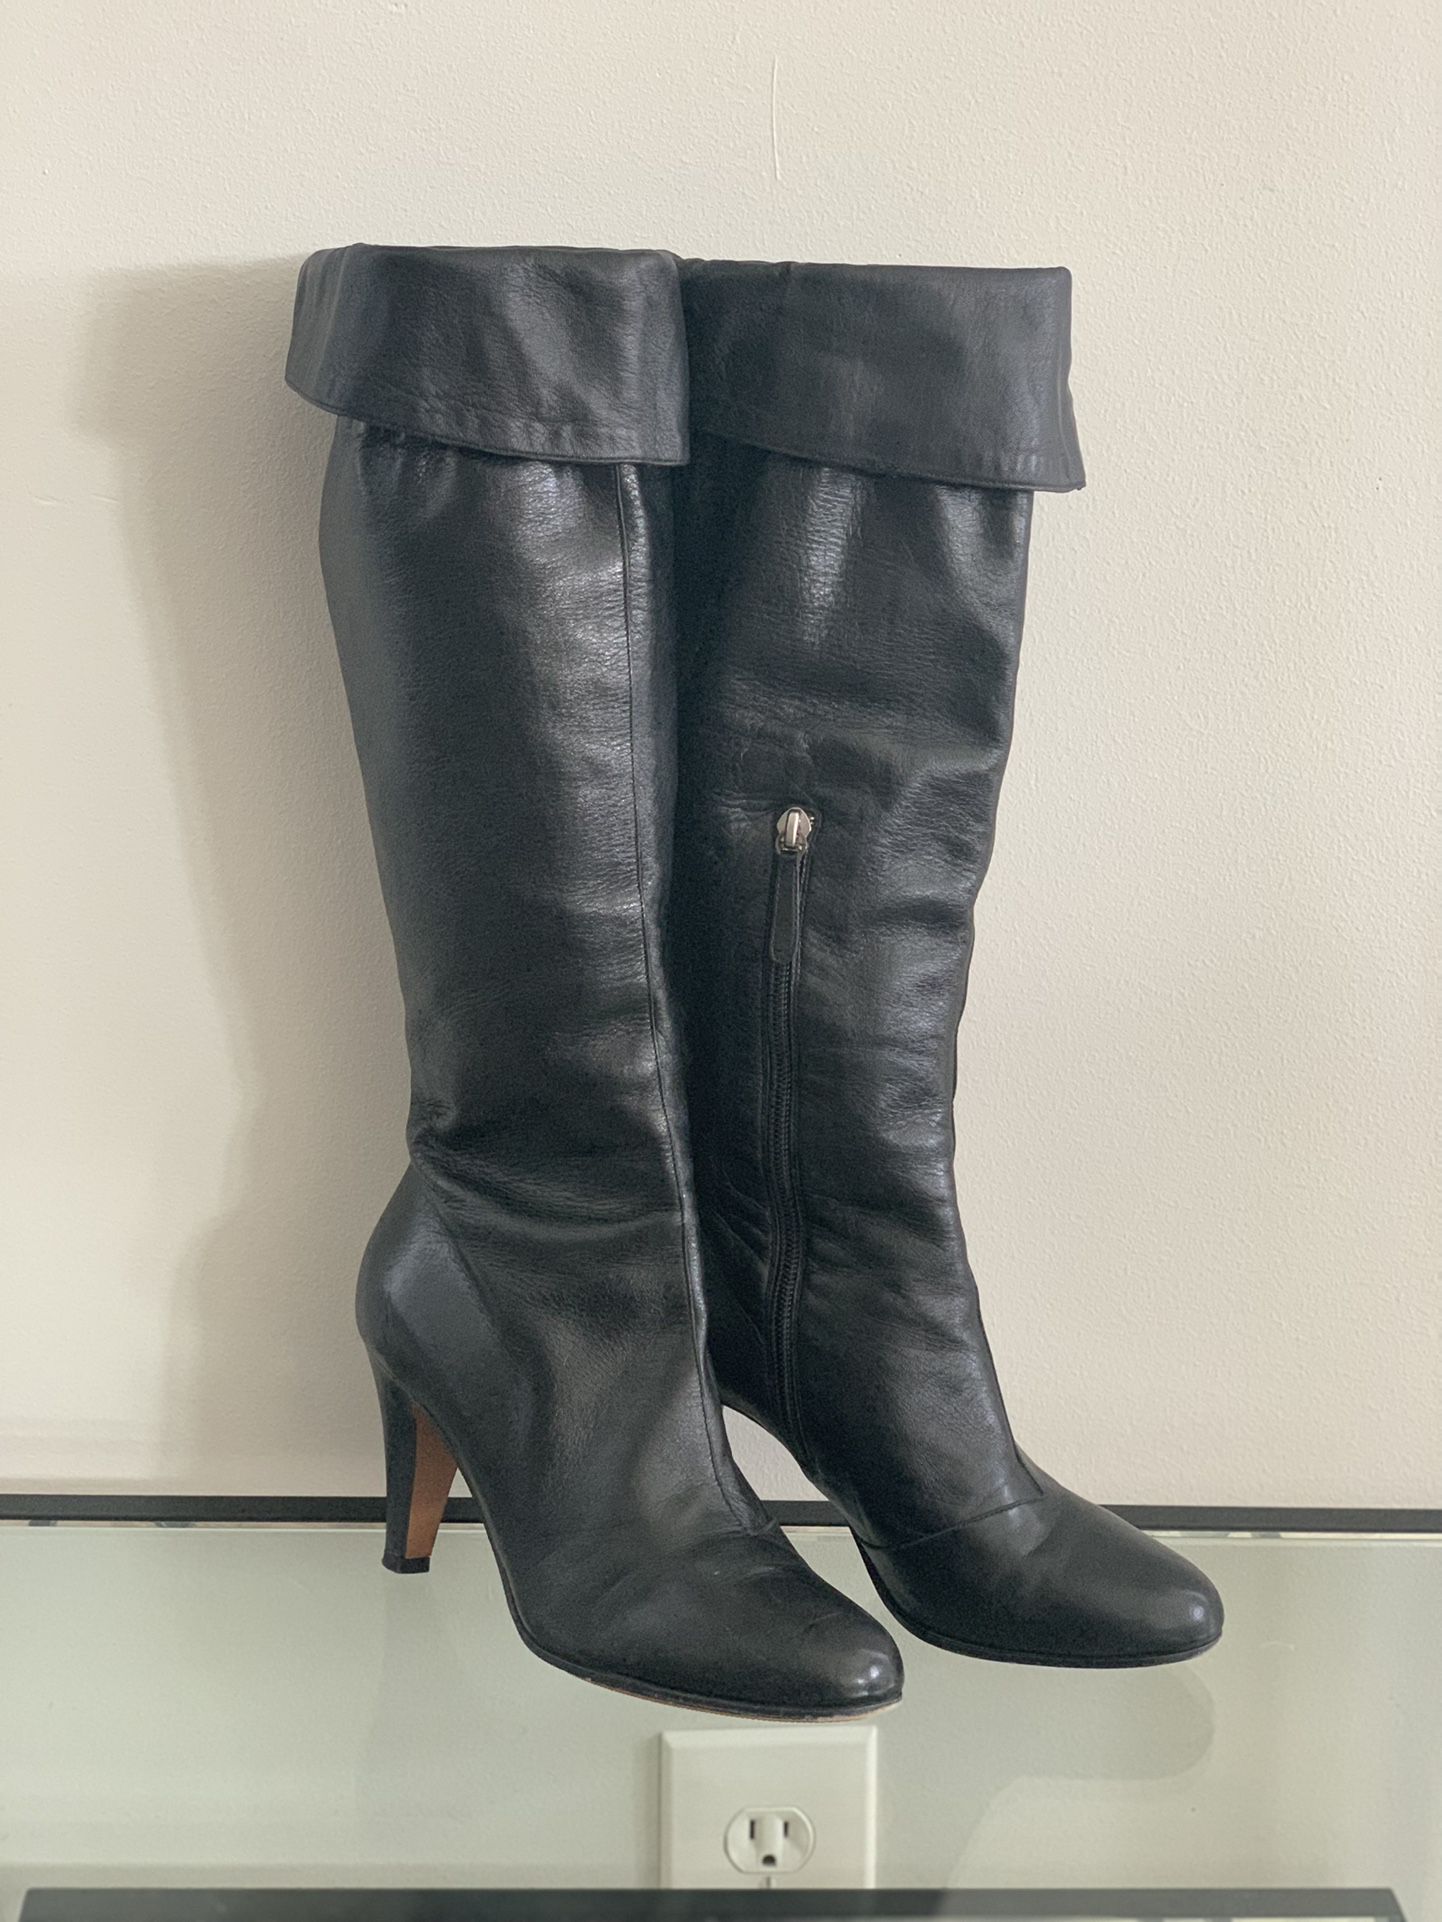 Moschino Cheap &  Chic Tall Boots-black-size 6.5 Italy